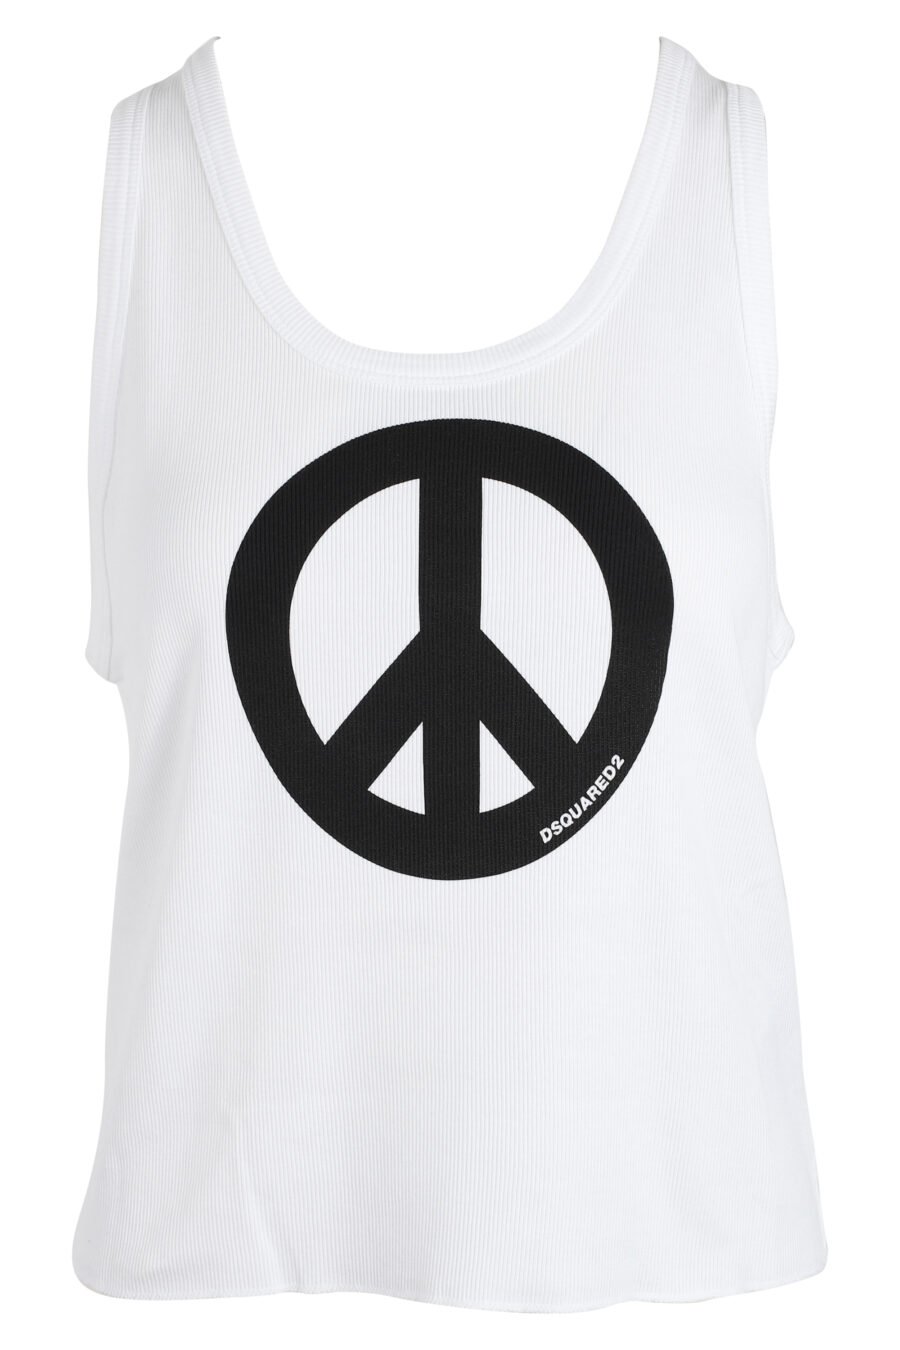 White tank top with peace logo - IMG 4859